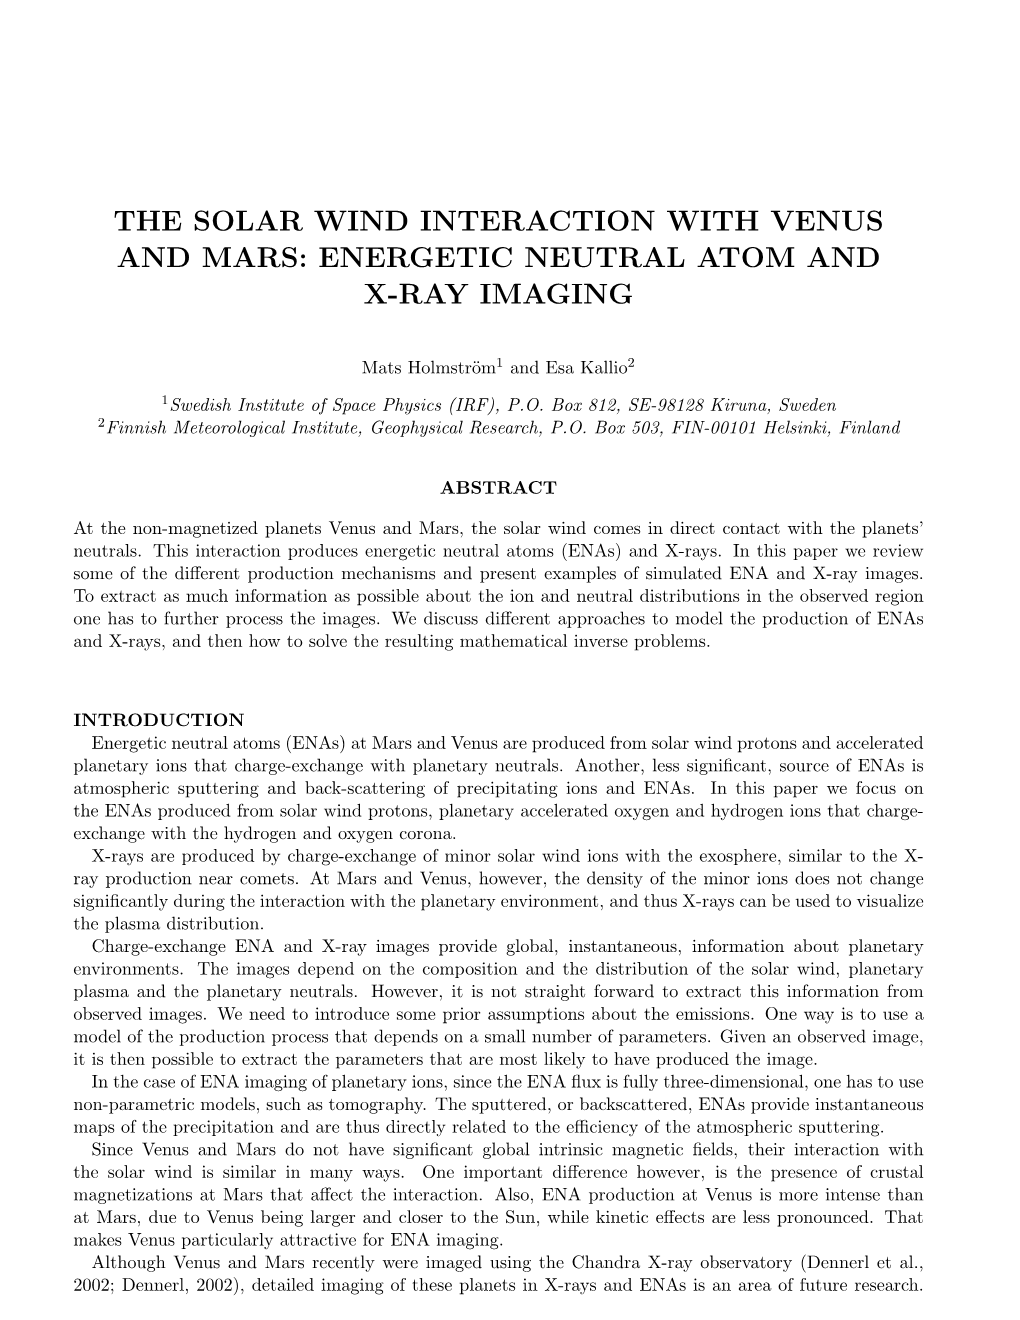 The Solar Wind Interaction with Venus and Mars: Energetic Neutral Atom and X-Ray Imaging